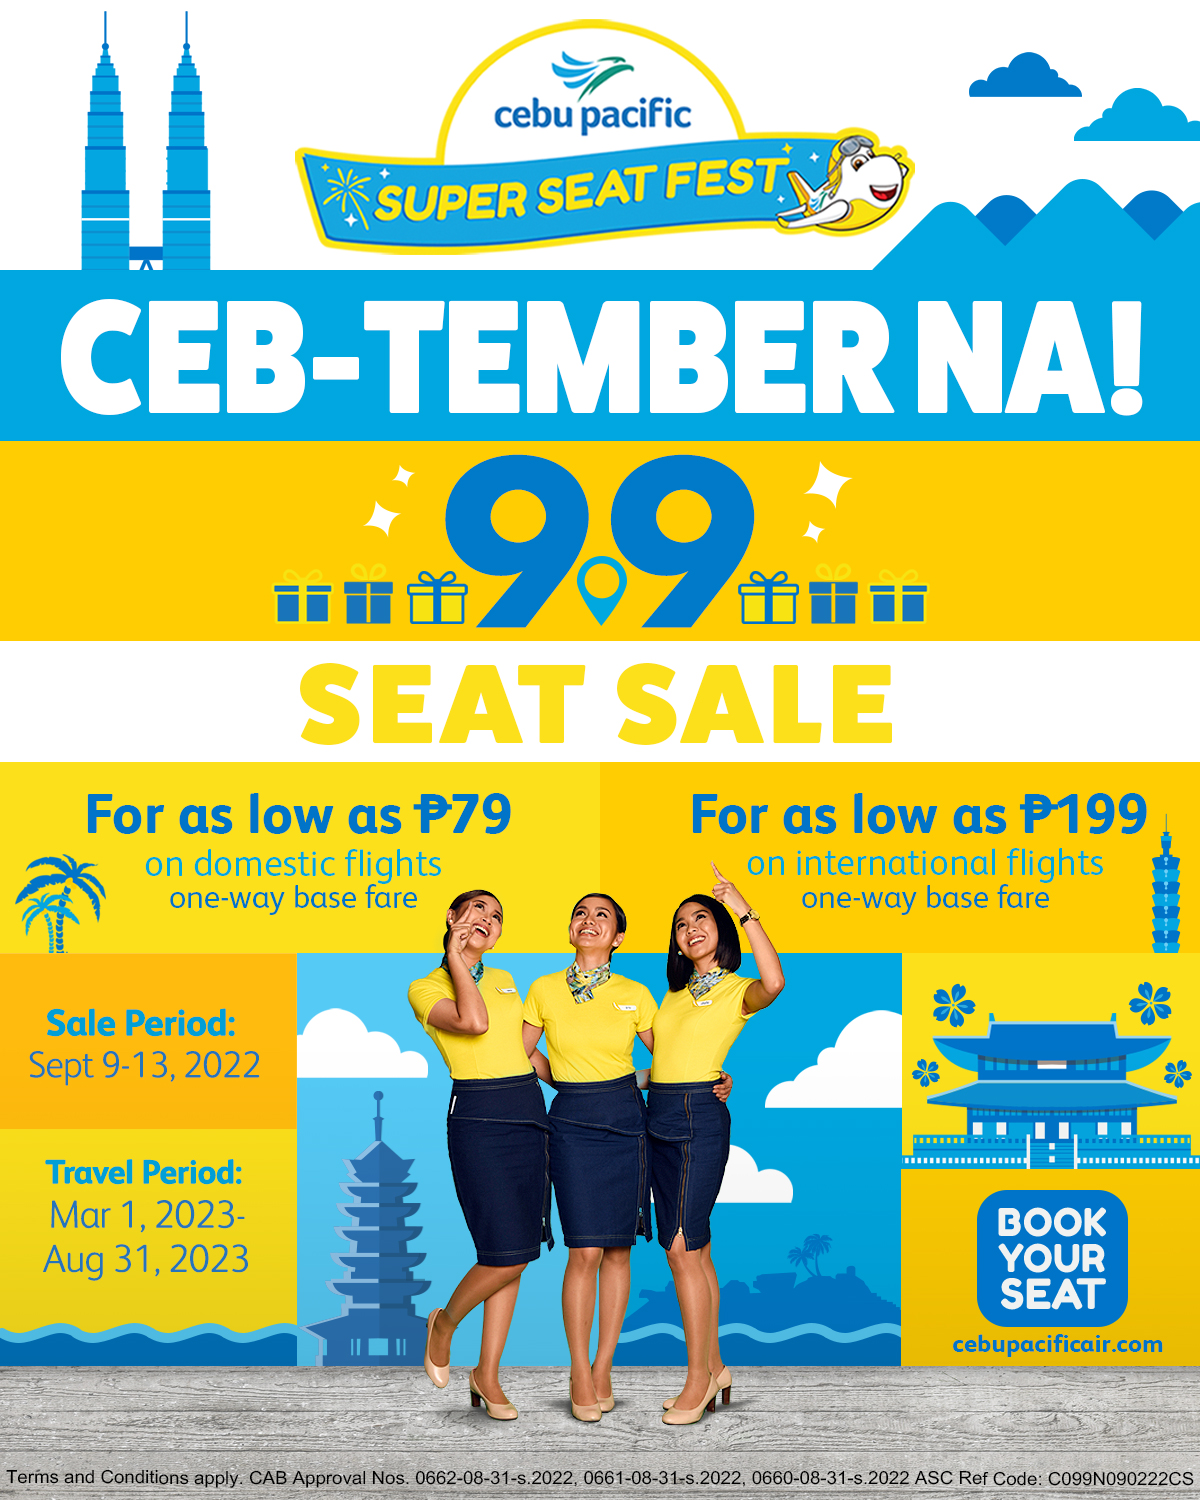 seat-sale-alert-cebu-pacific-s-9-9-seat-sale-for-as-low-as-php79-one